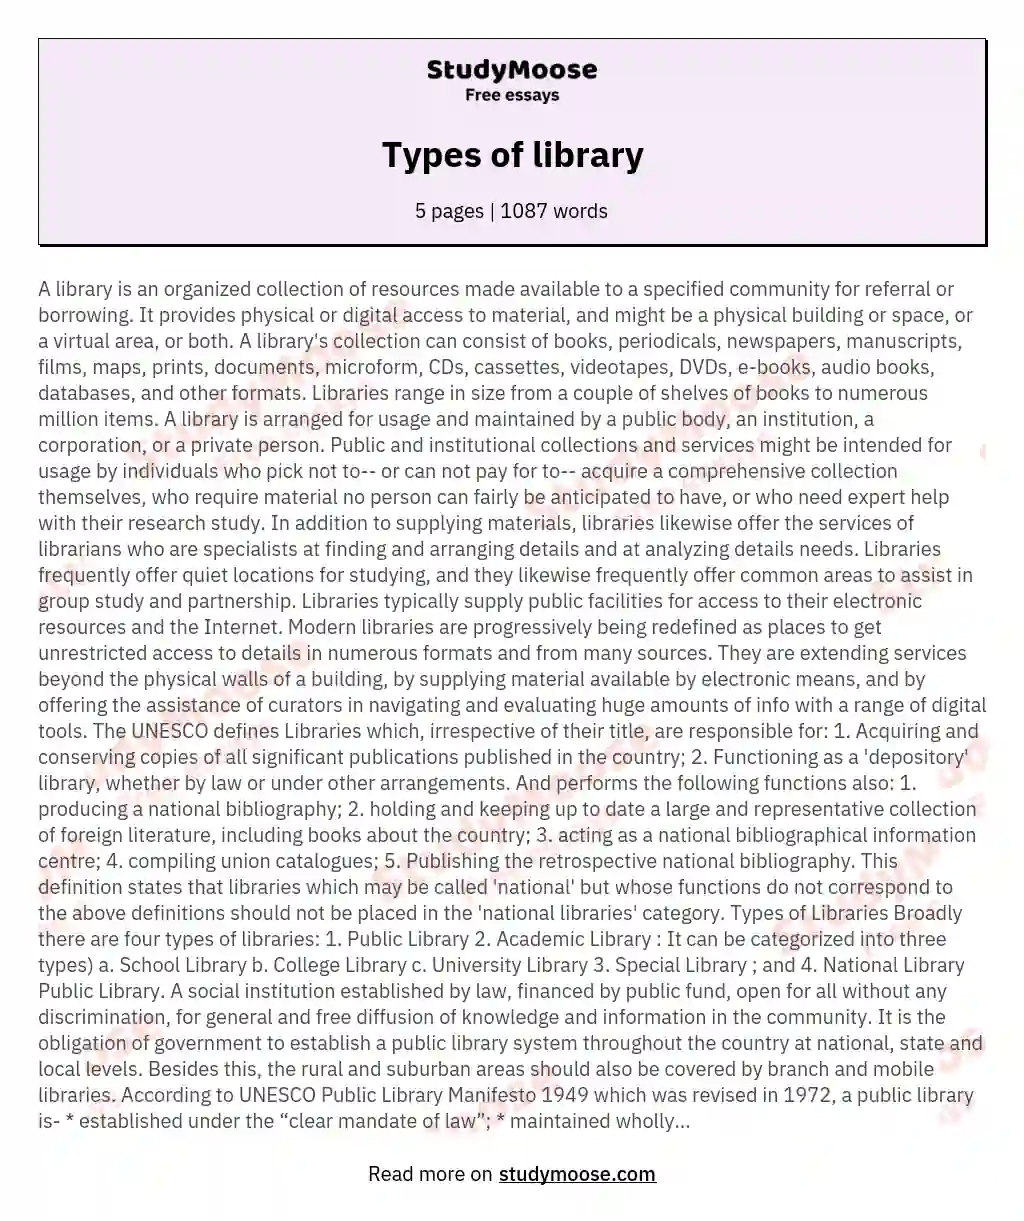 Types of library essay